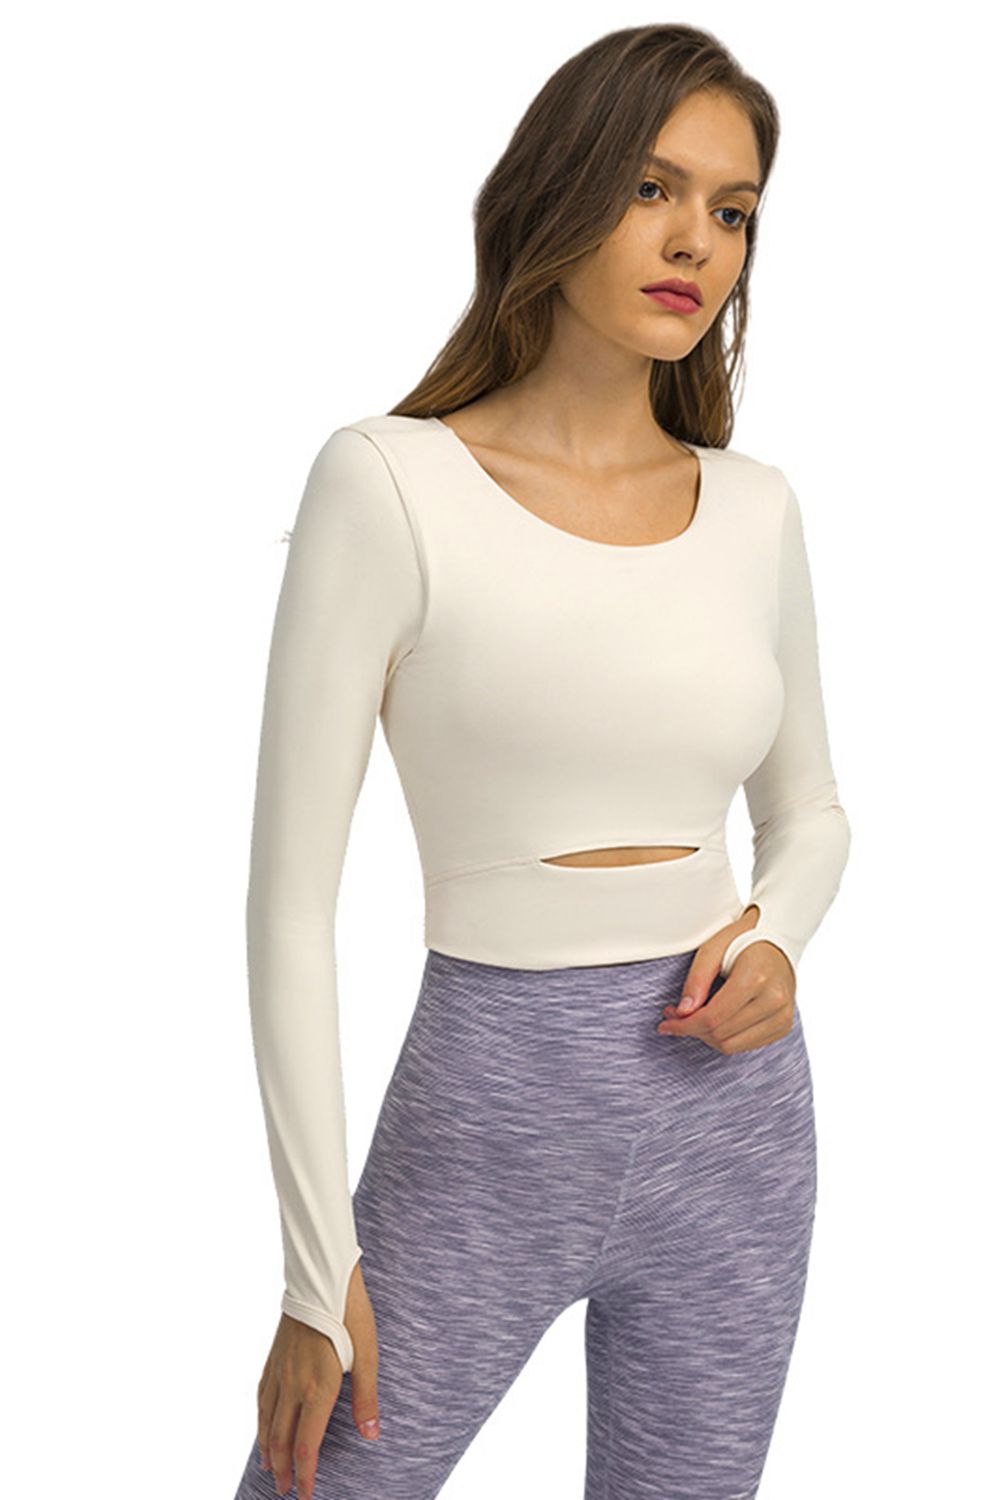 Cut Out Front Crop Yoga Tee - Keene's